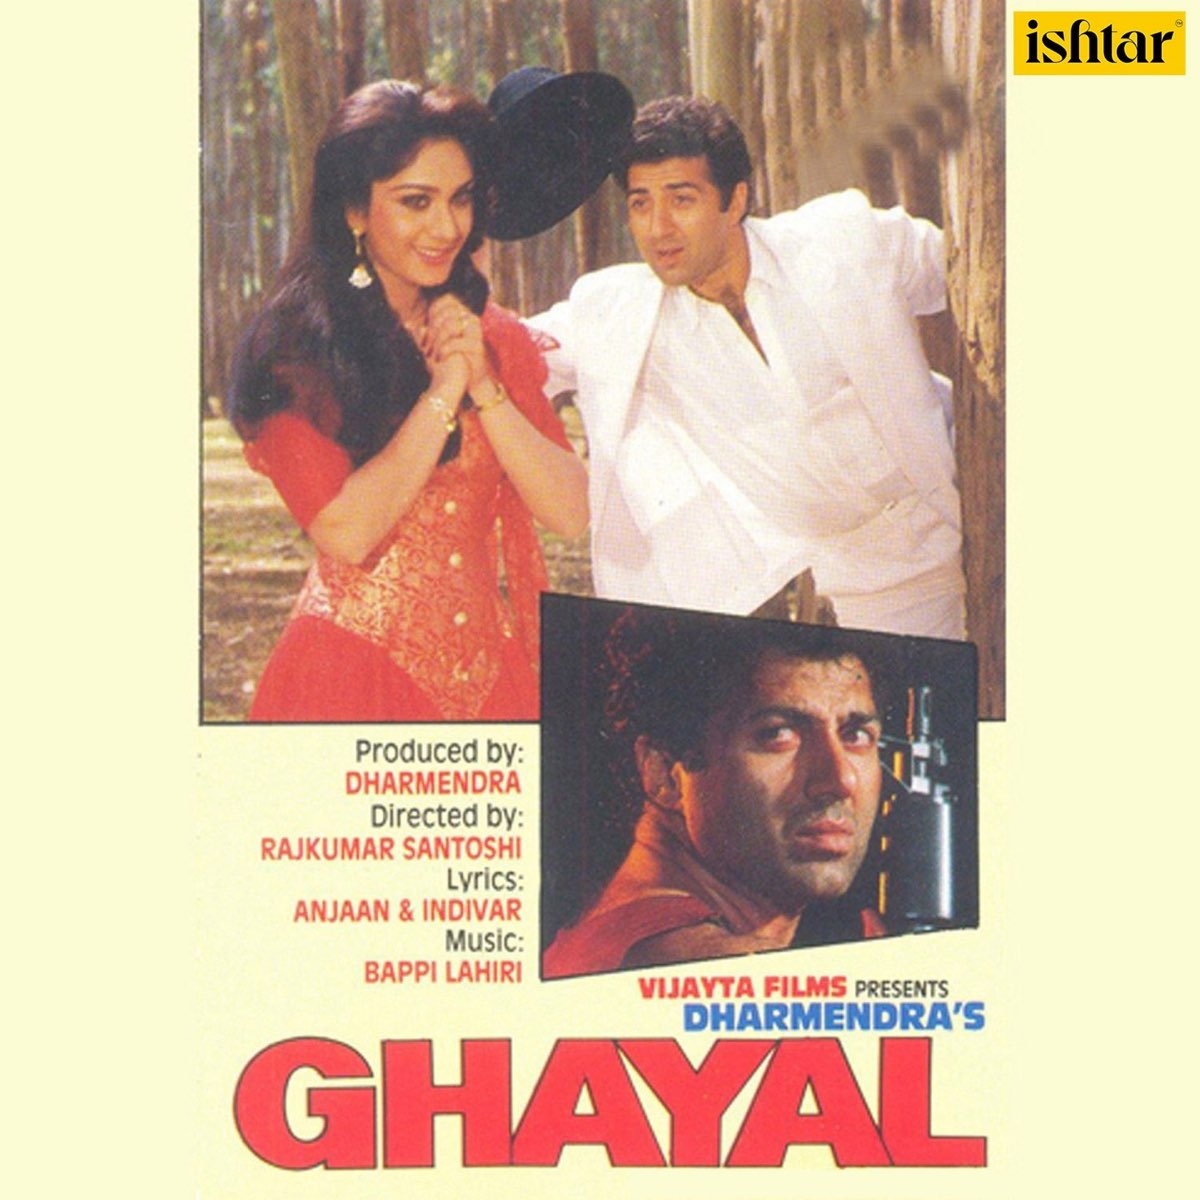 Ghayal (Original Motion Picture Soundtrack) by Bappi Lahiri on Apple Music